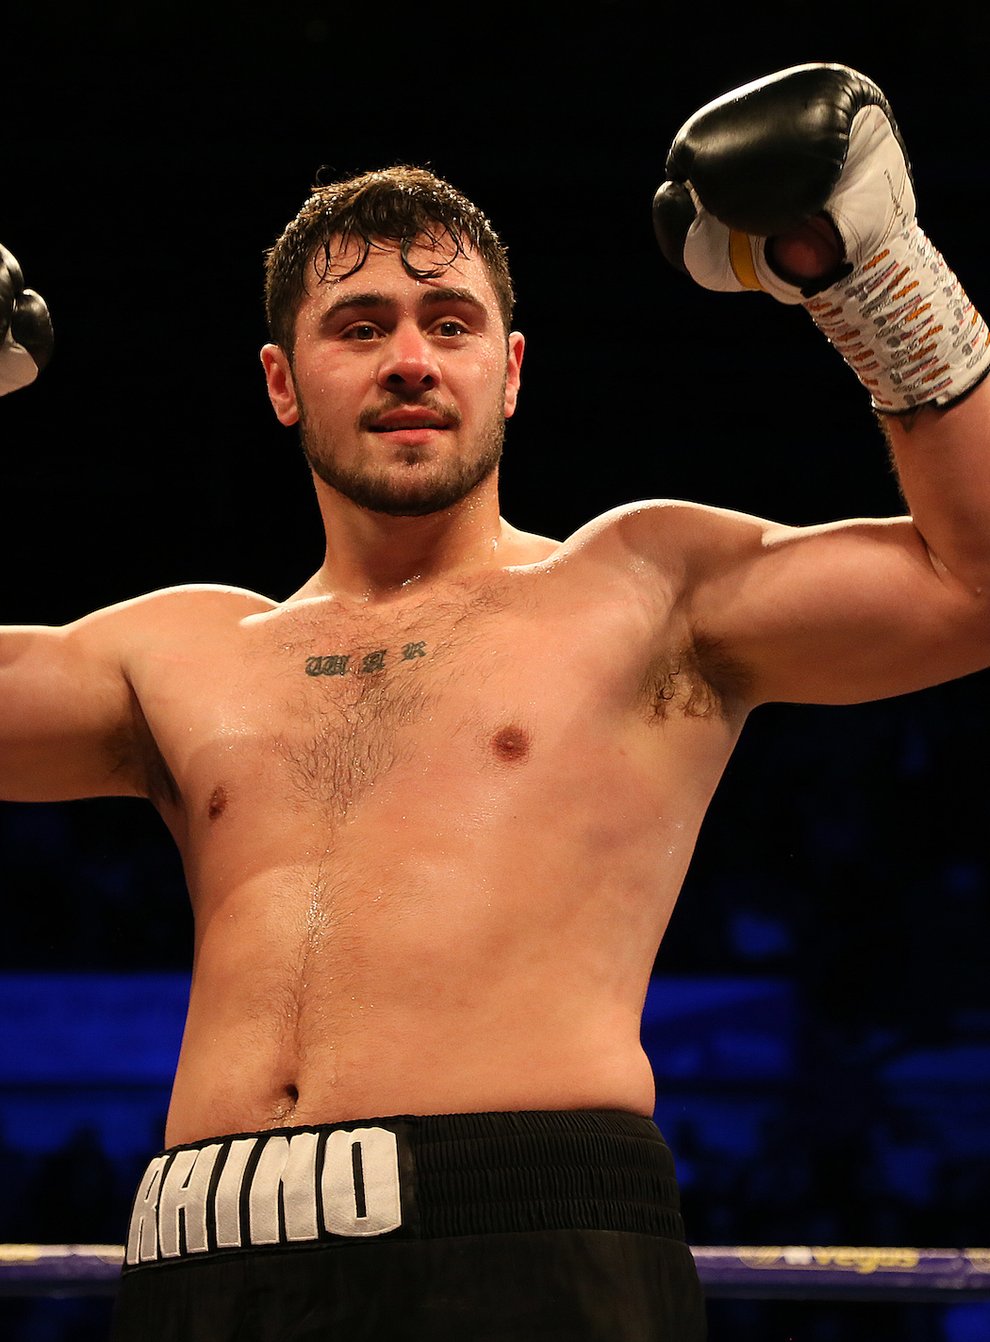 Allen has made a name for himself as one of the most popular British fighters in recent times